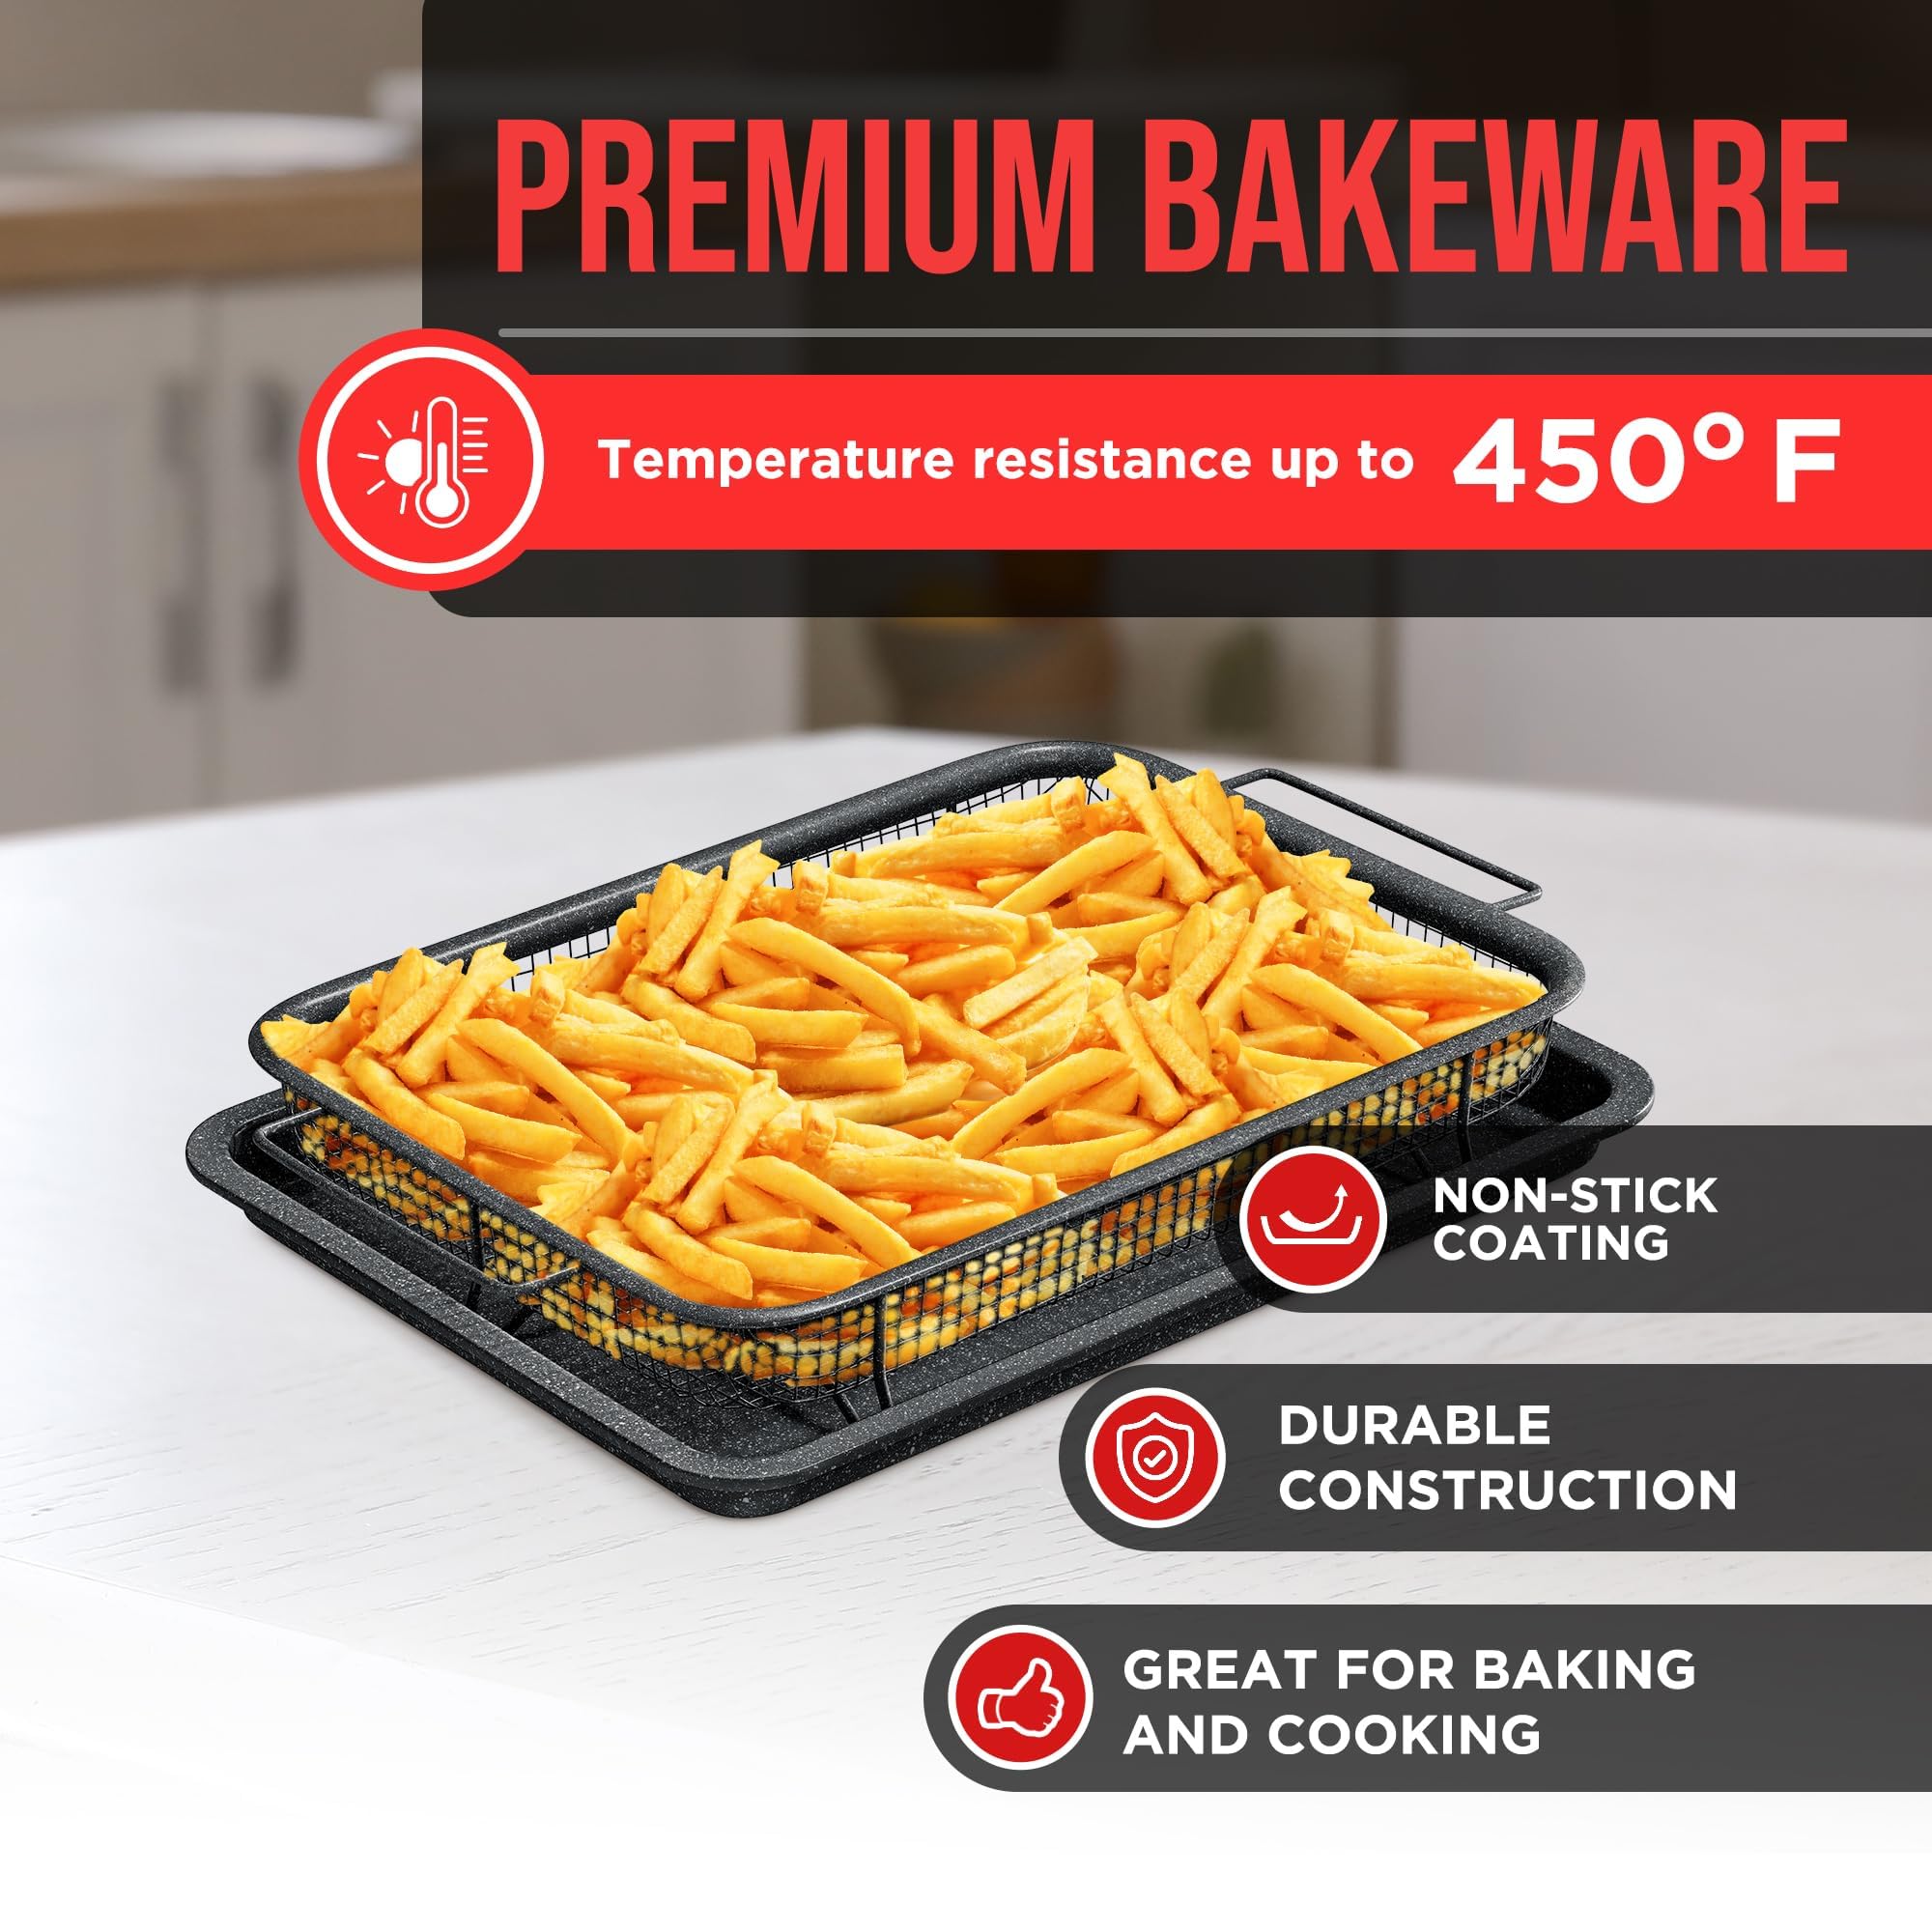 Bakken Swiss Crisper Tray - 2-Piece Set – Gray Marble, Non-Stick Basket Design for Healthier Cooking in Regular Ovens - Achieve Perfectly Crispy Chips, Bacon and More